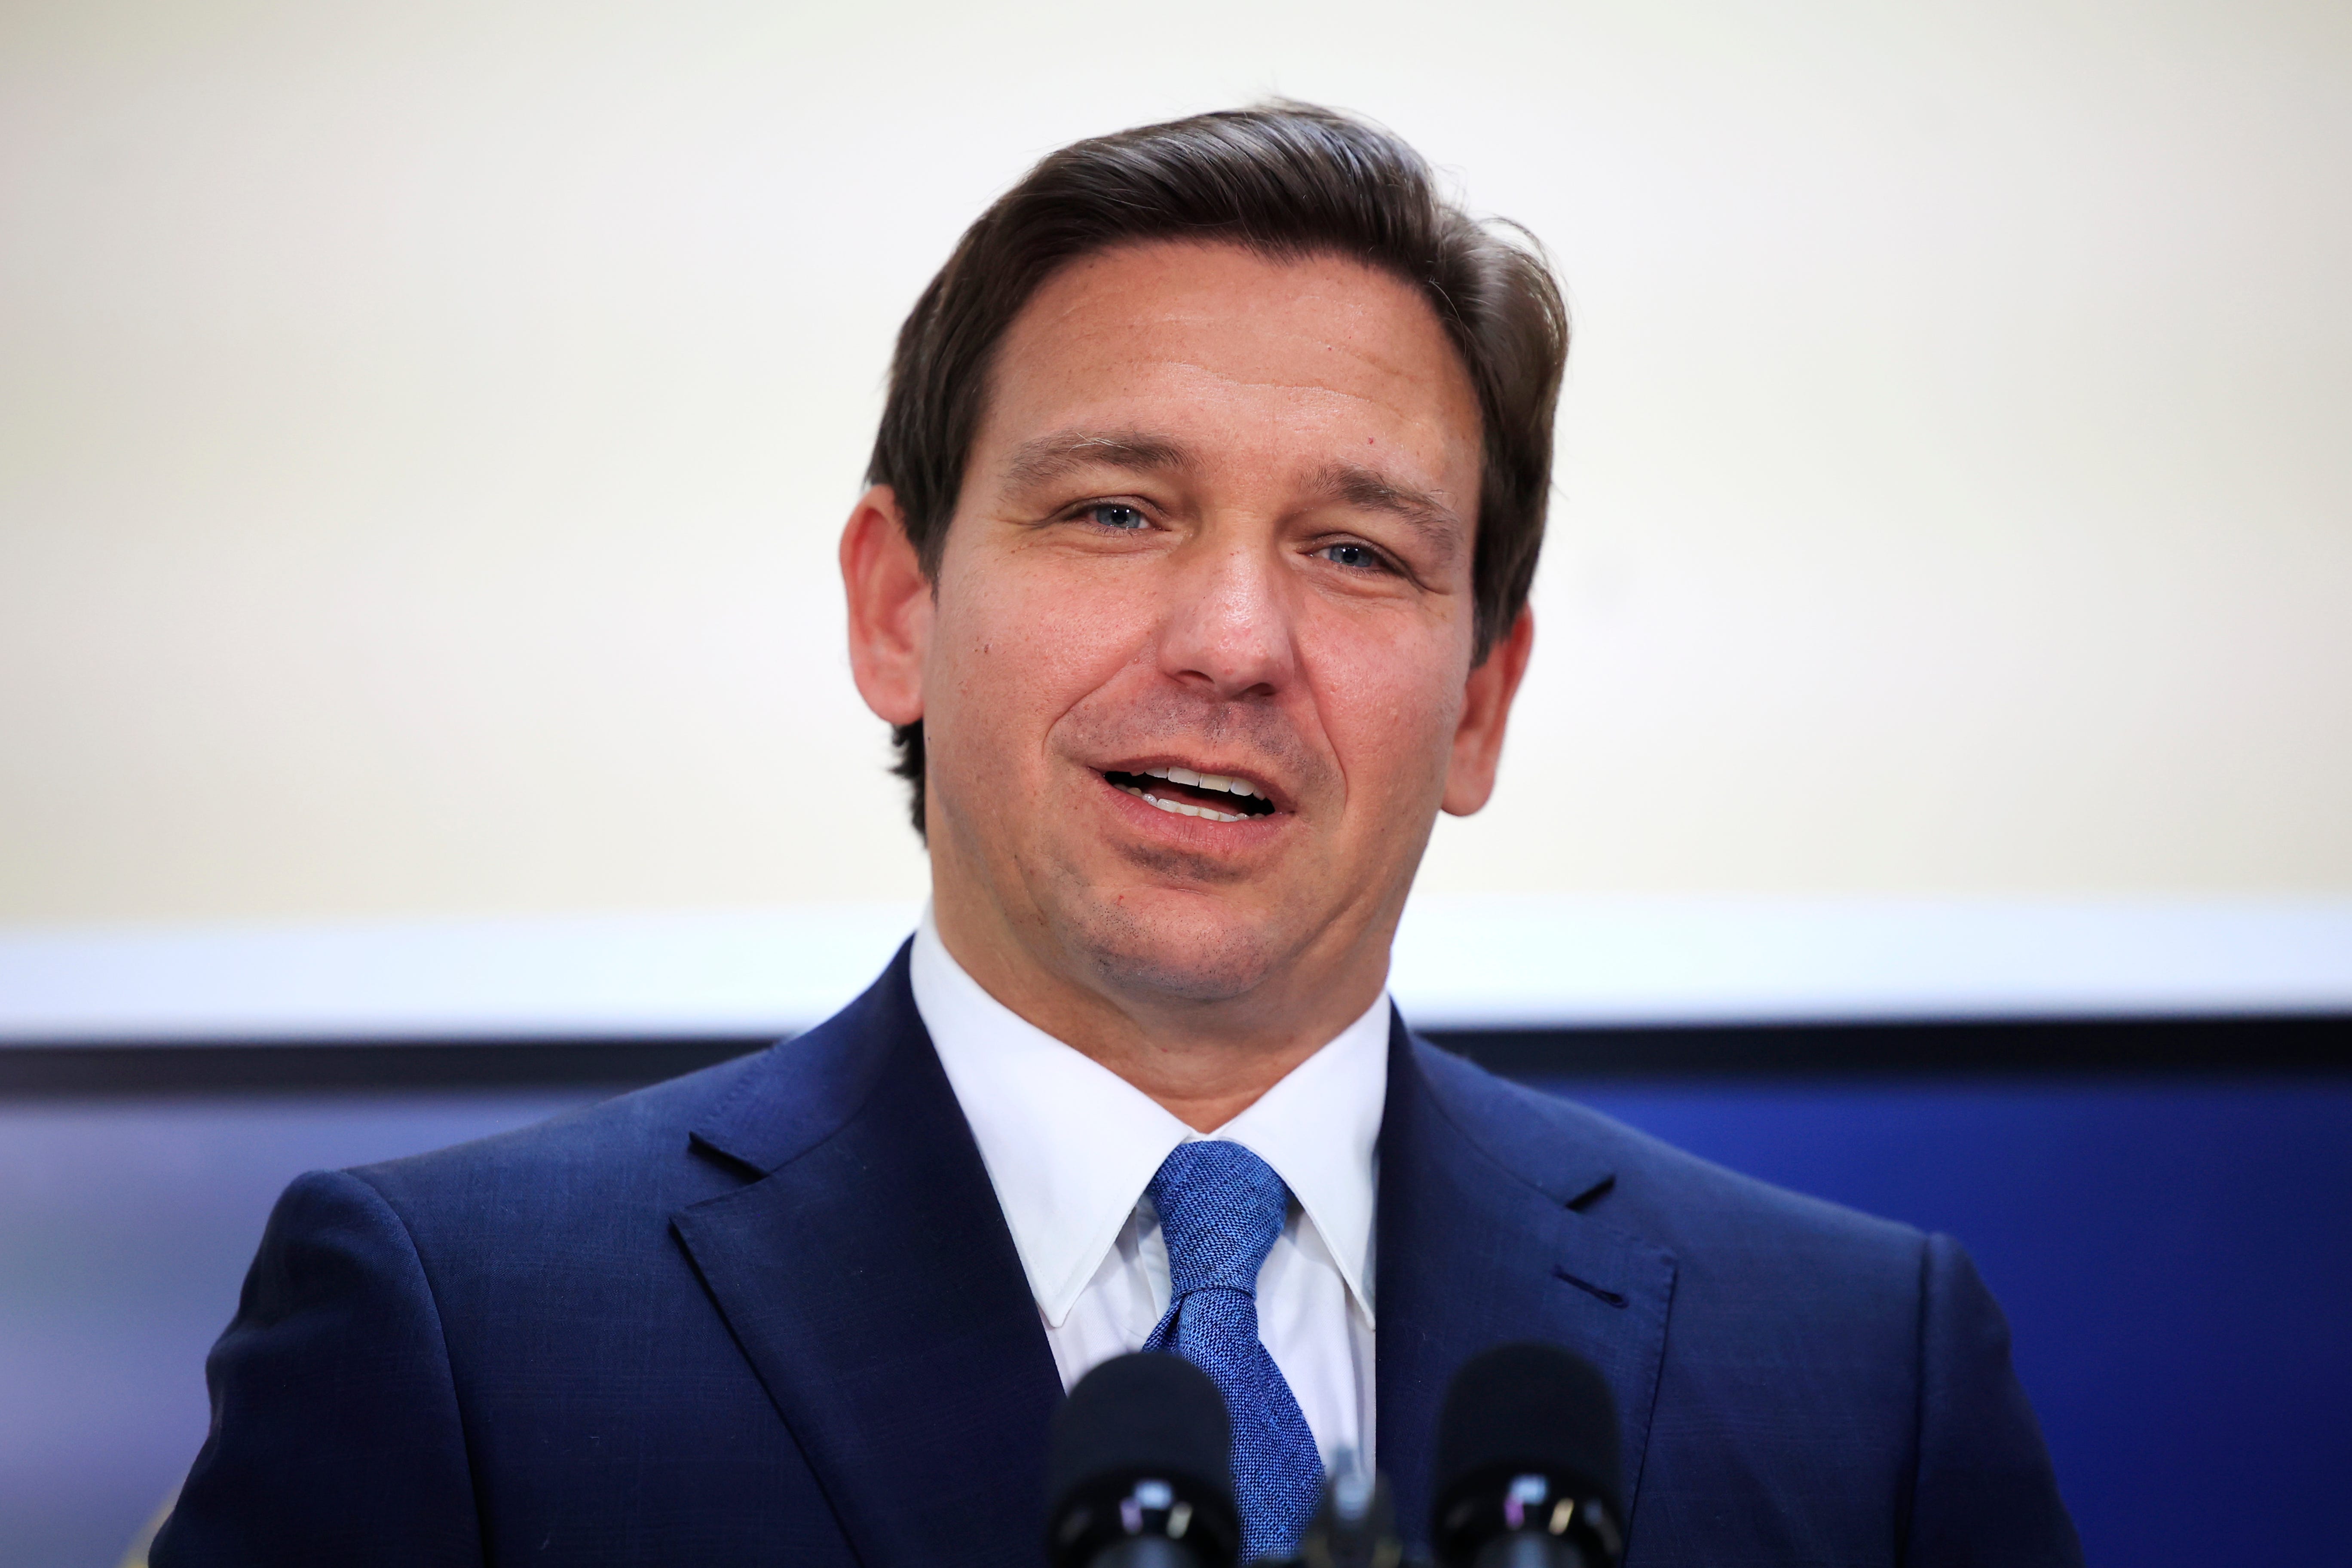 DeSantis wants to give Florida college students an anti-woke option. What's the big deal?